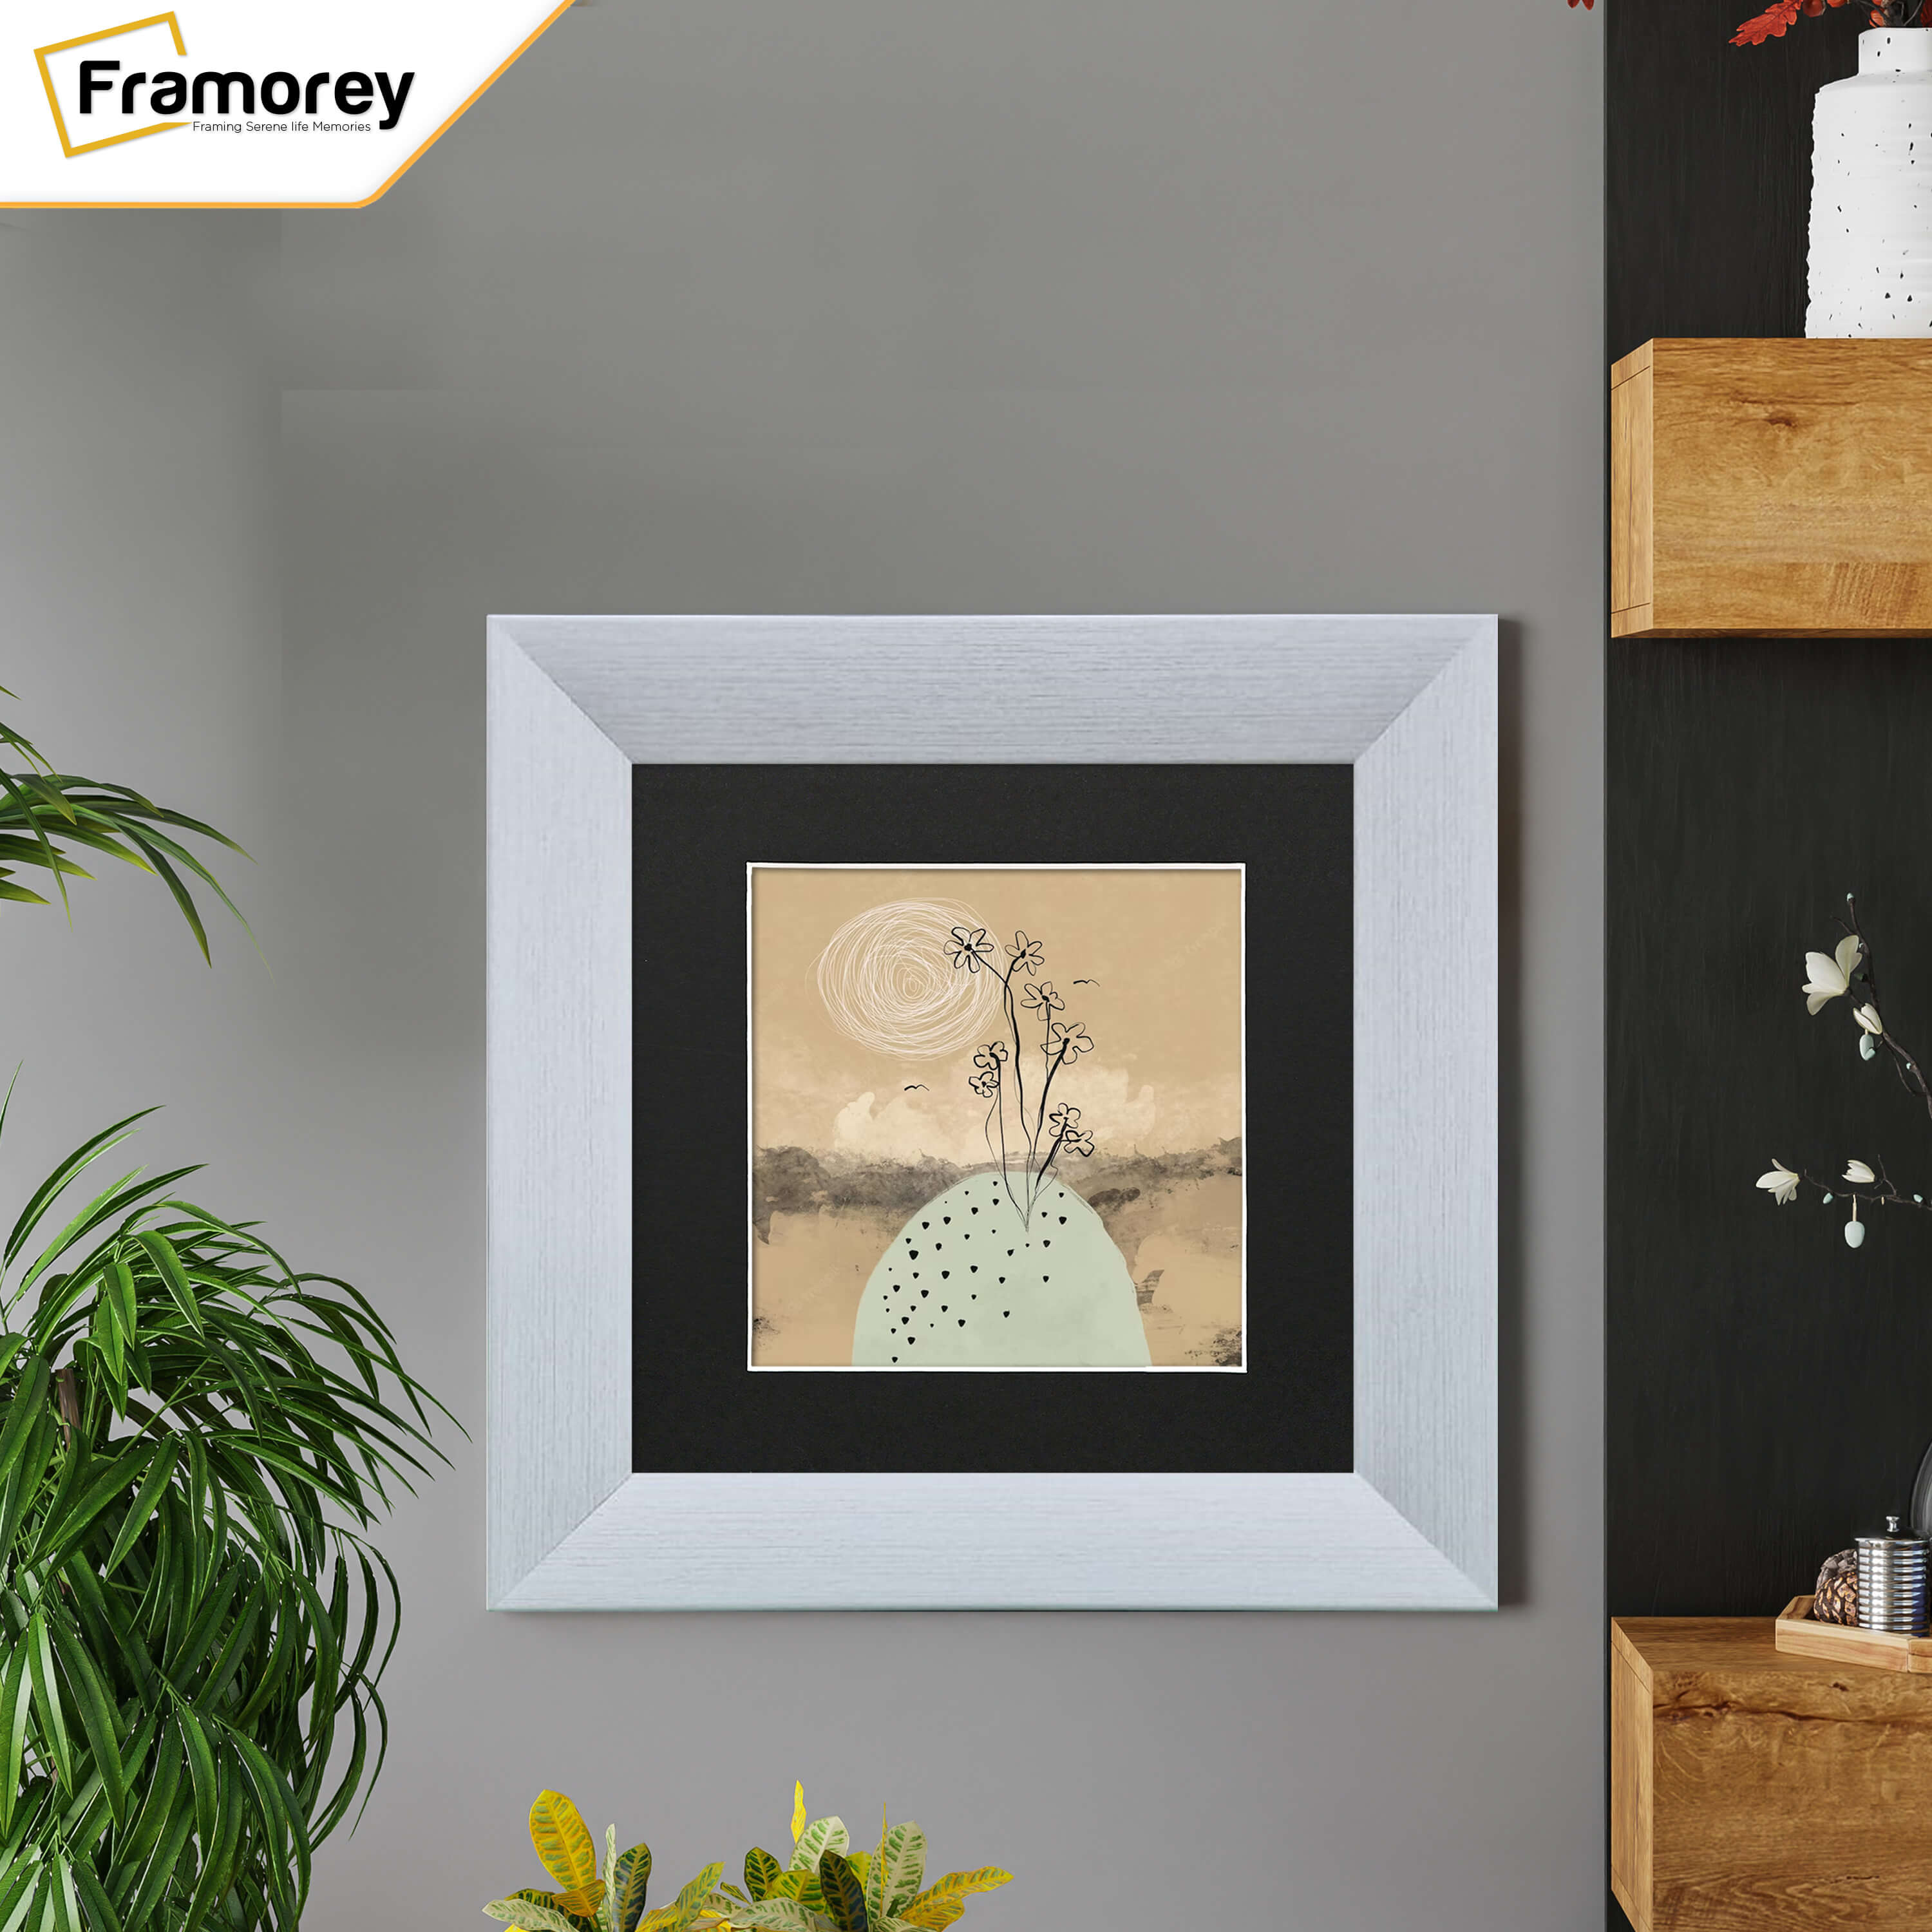 Square Size Limed White Picture Frames With Black Mount